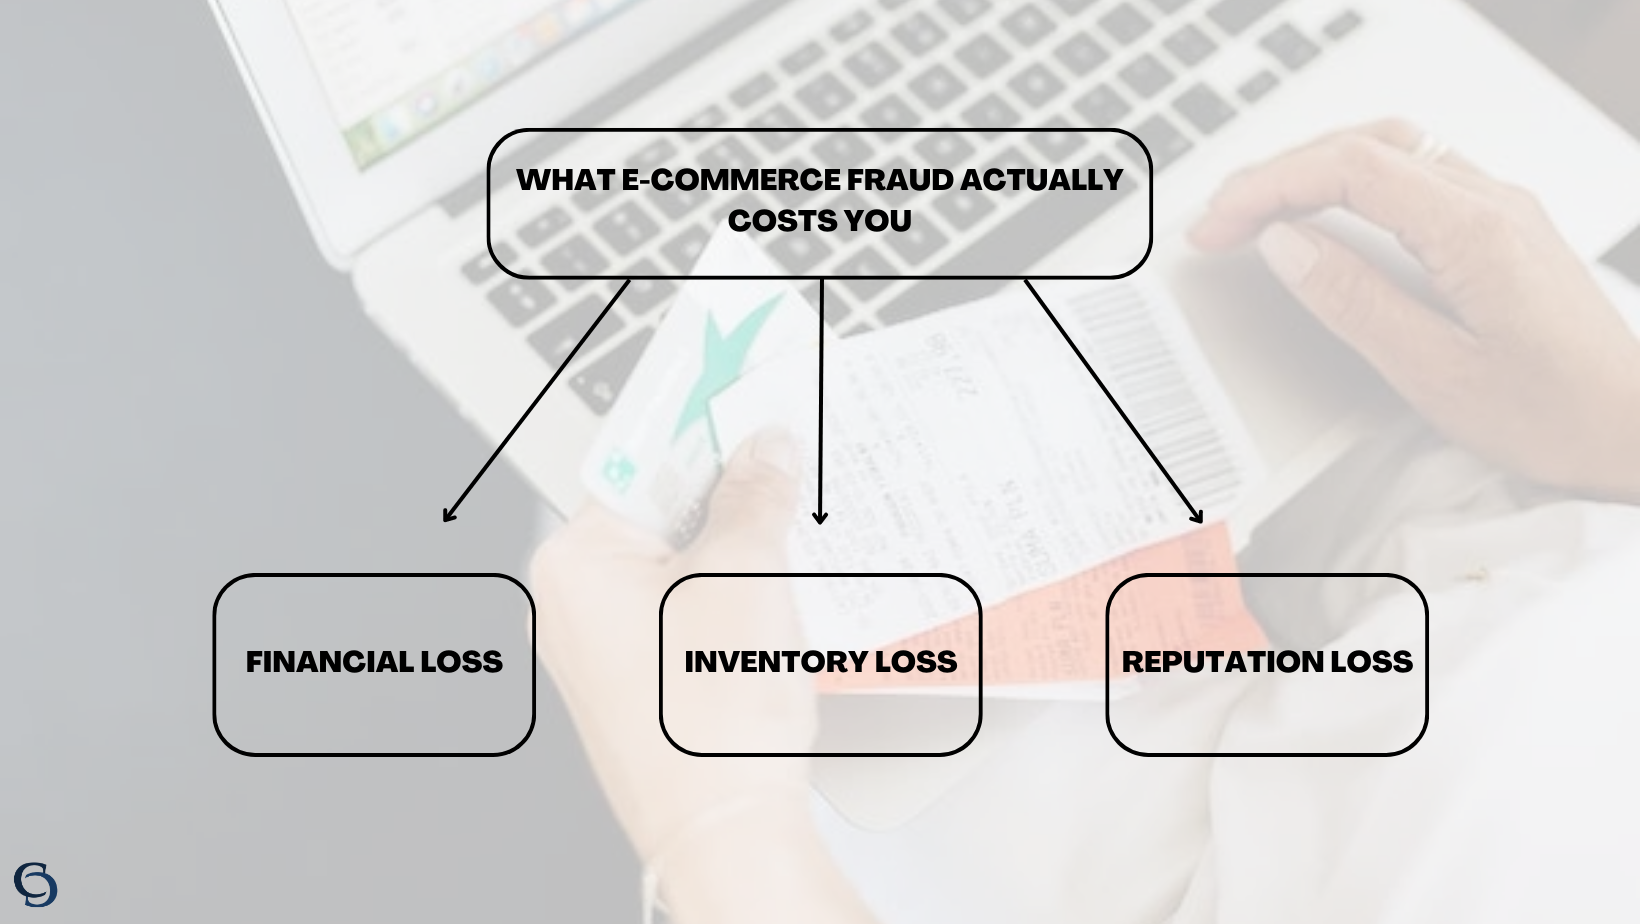 What E-commerce Fraud Actually Costs You